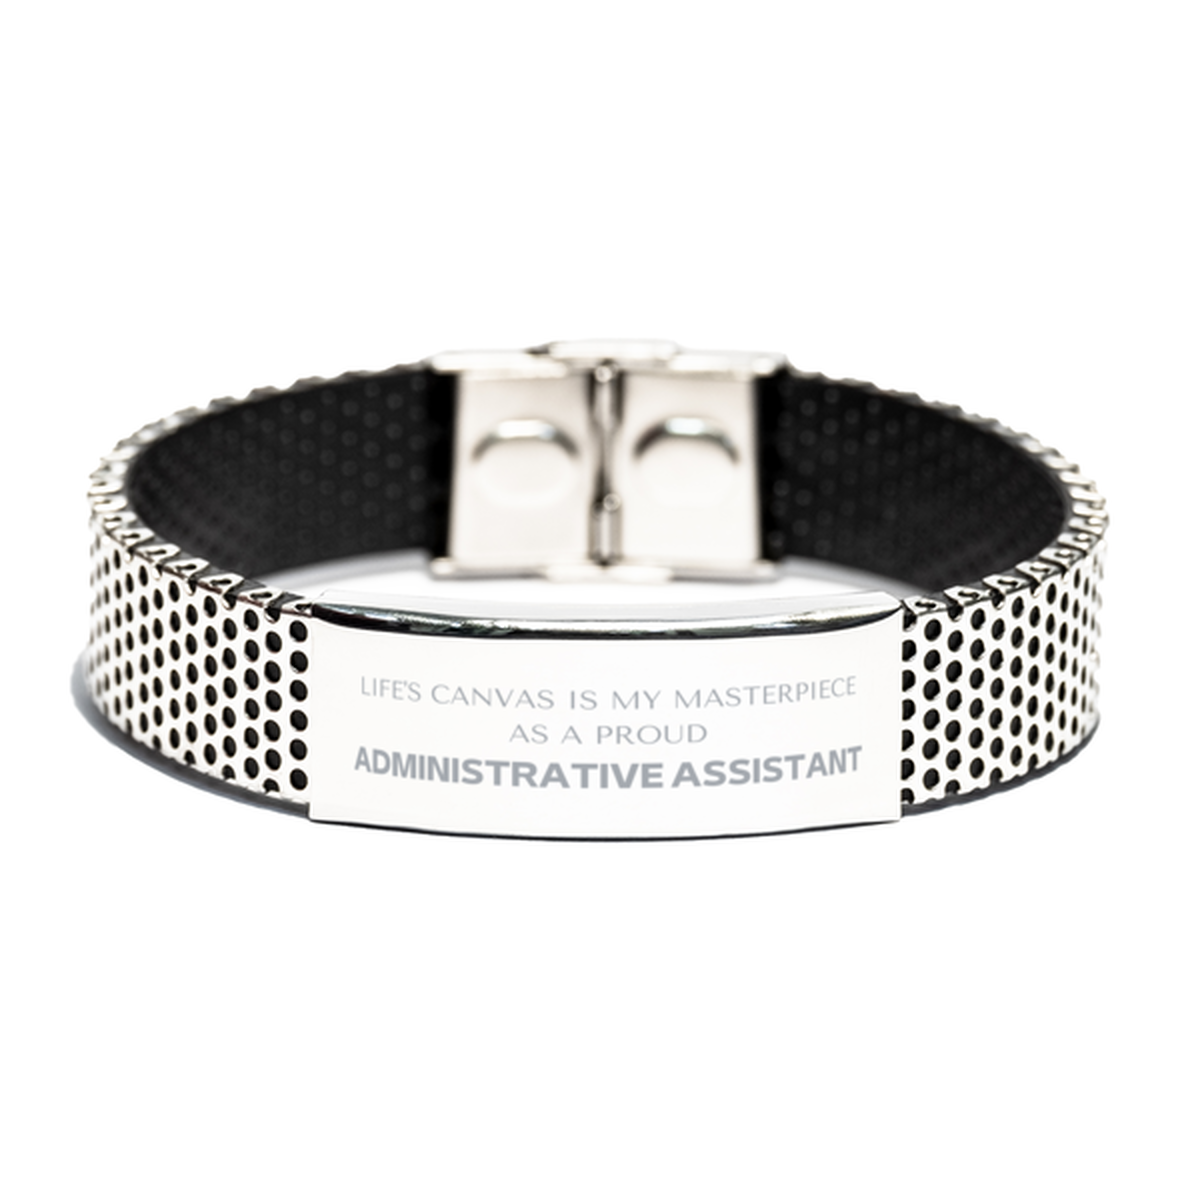 Proud Administrative Assistant Gifts, Life's canvas is my masterpiece, Epic Birthday Christmas Unique Stainless Steel Bracelet For Administrative Assistant, Coworkers, Men, Women, Friends